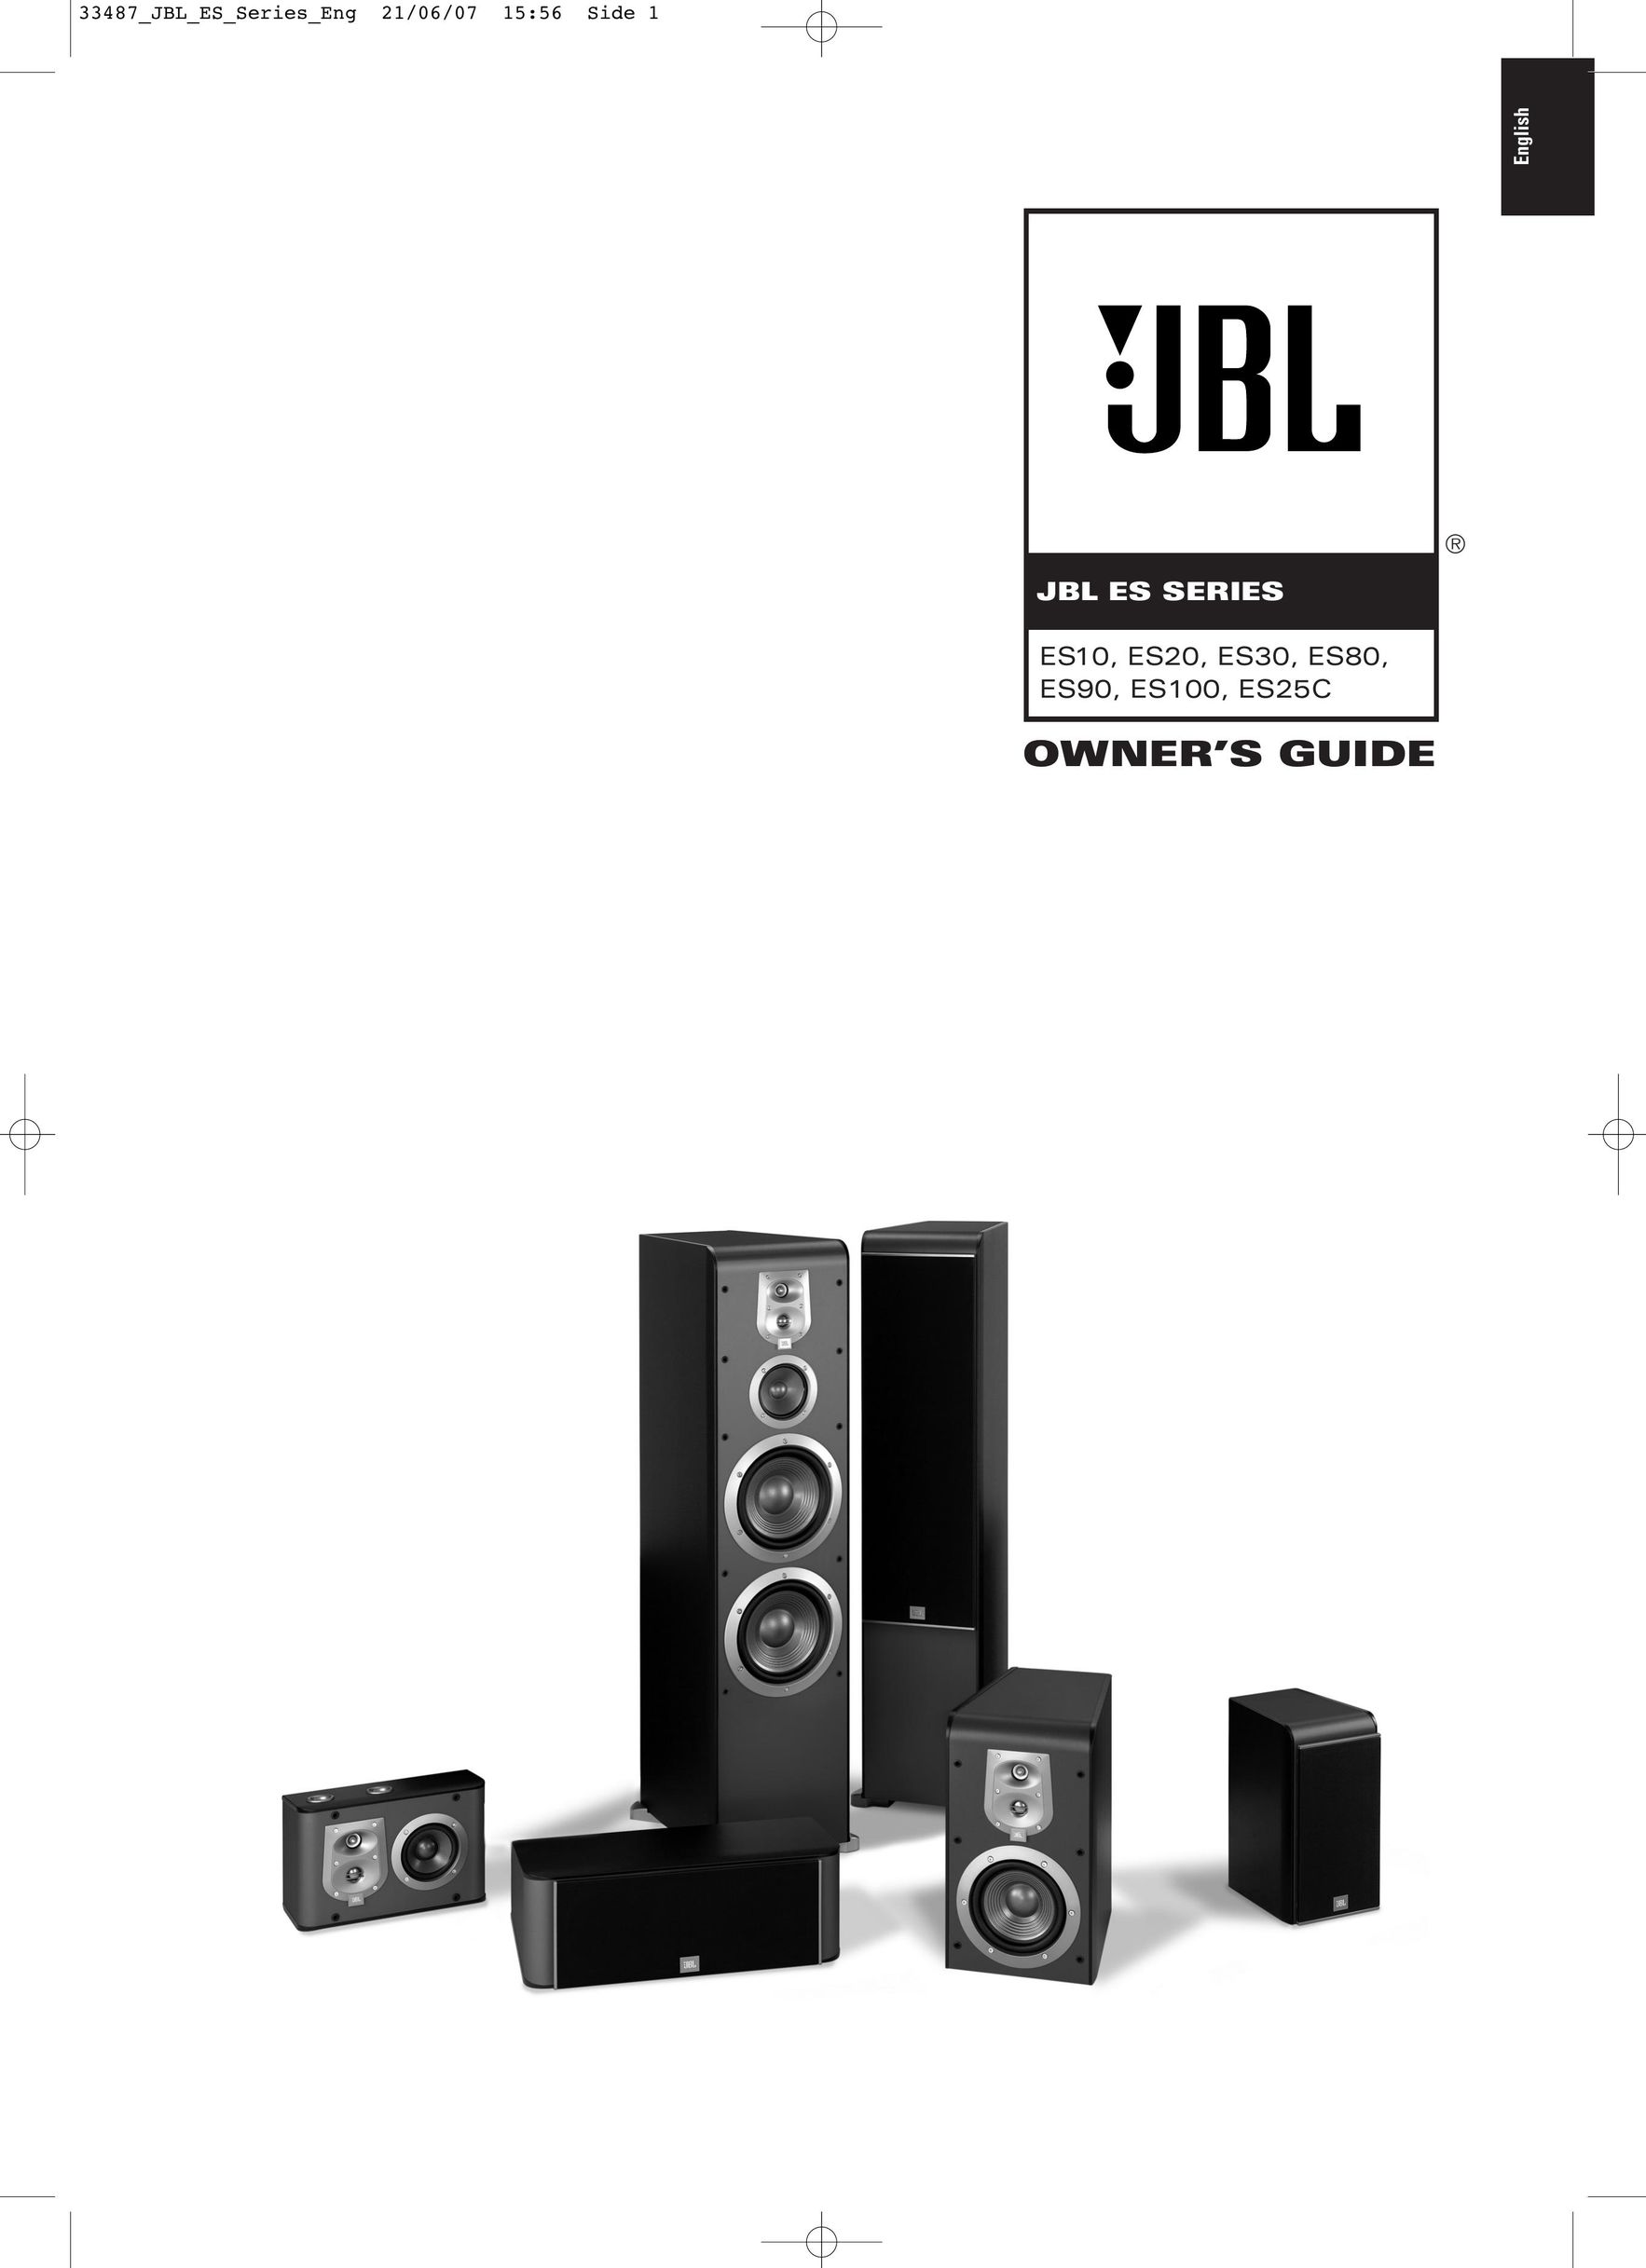 JBL ES25C Home Theater System User Manual